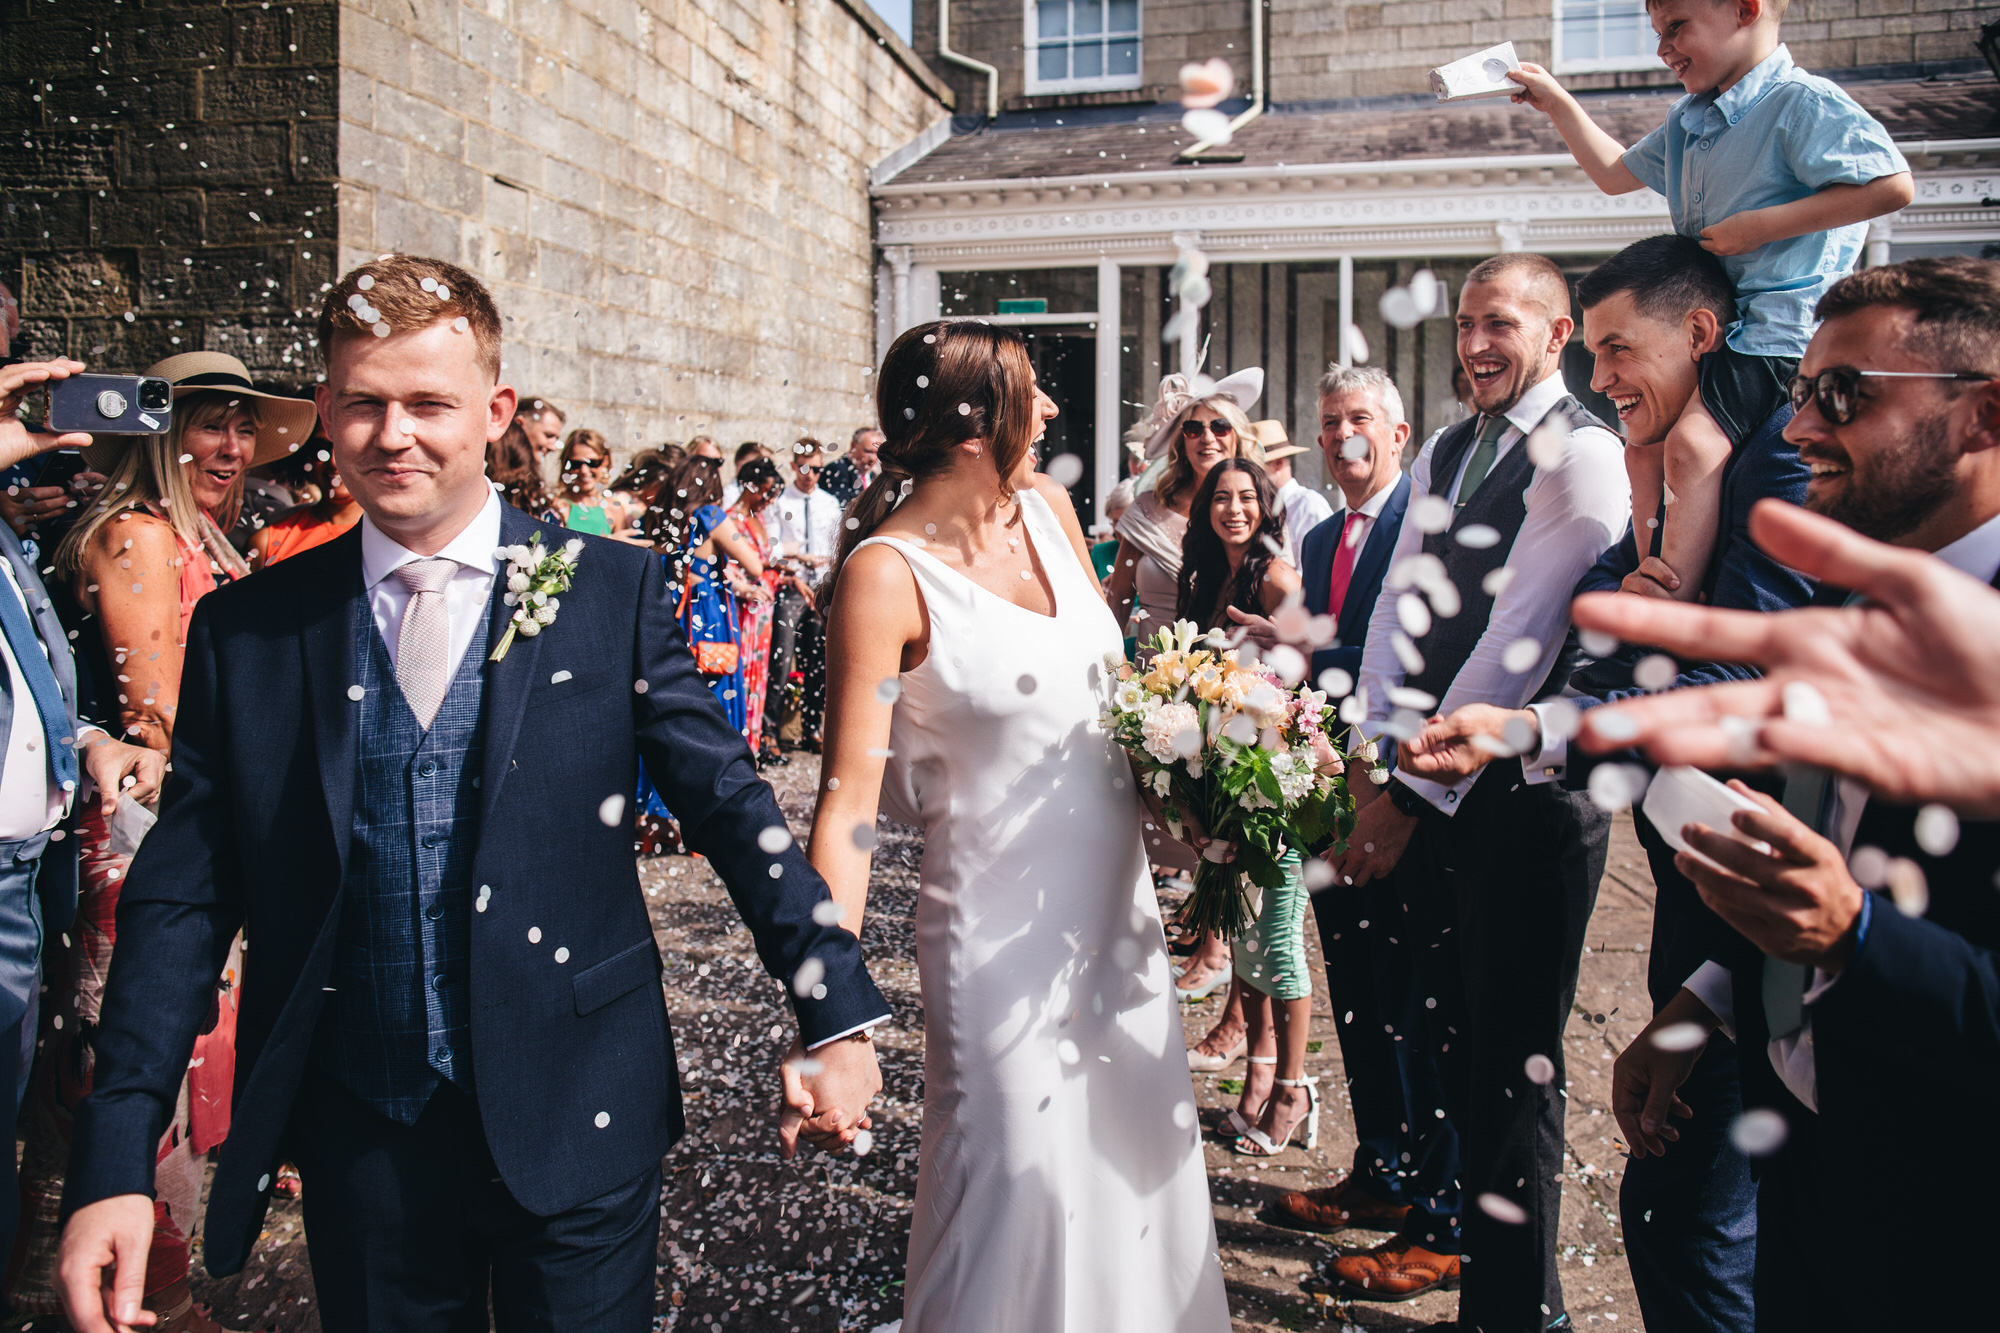 guests throwing confetti at bride and groom in sunshine